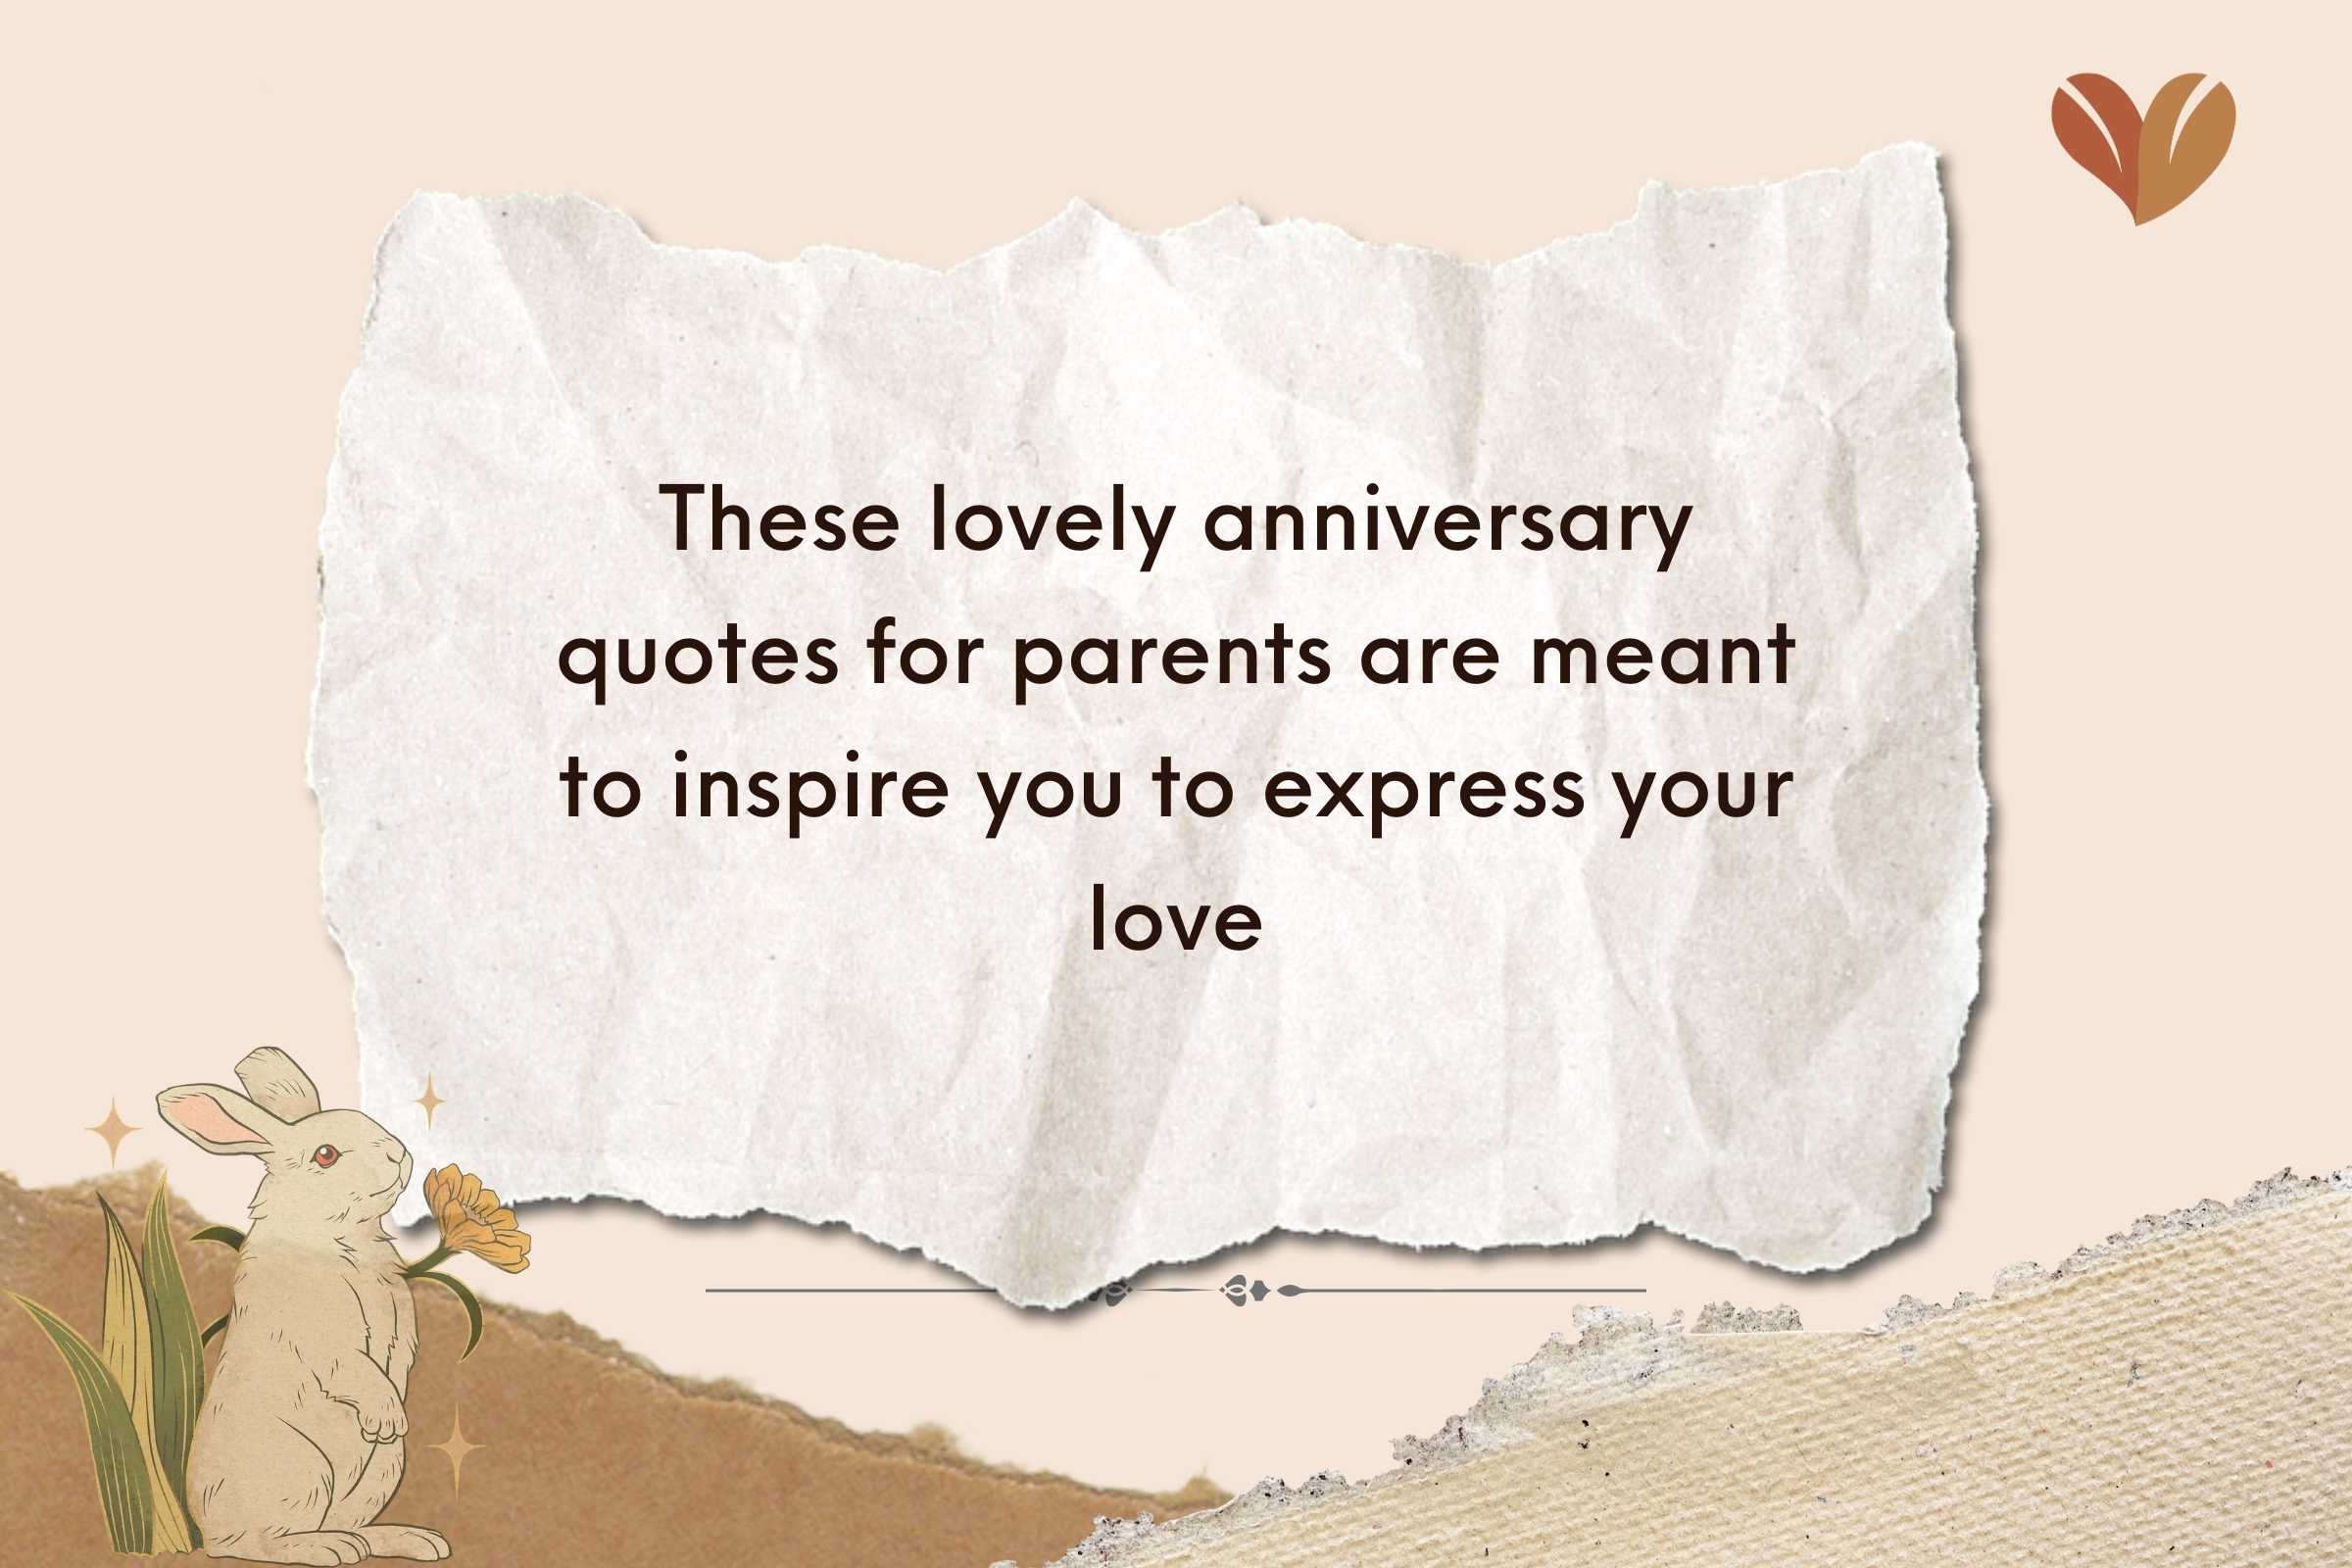 A tender moment to accompany lovely anniversary quotes for parents.